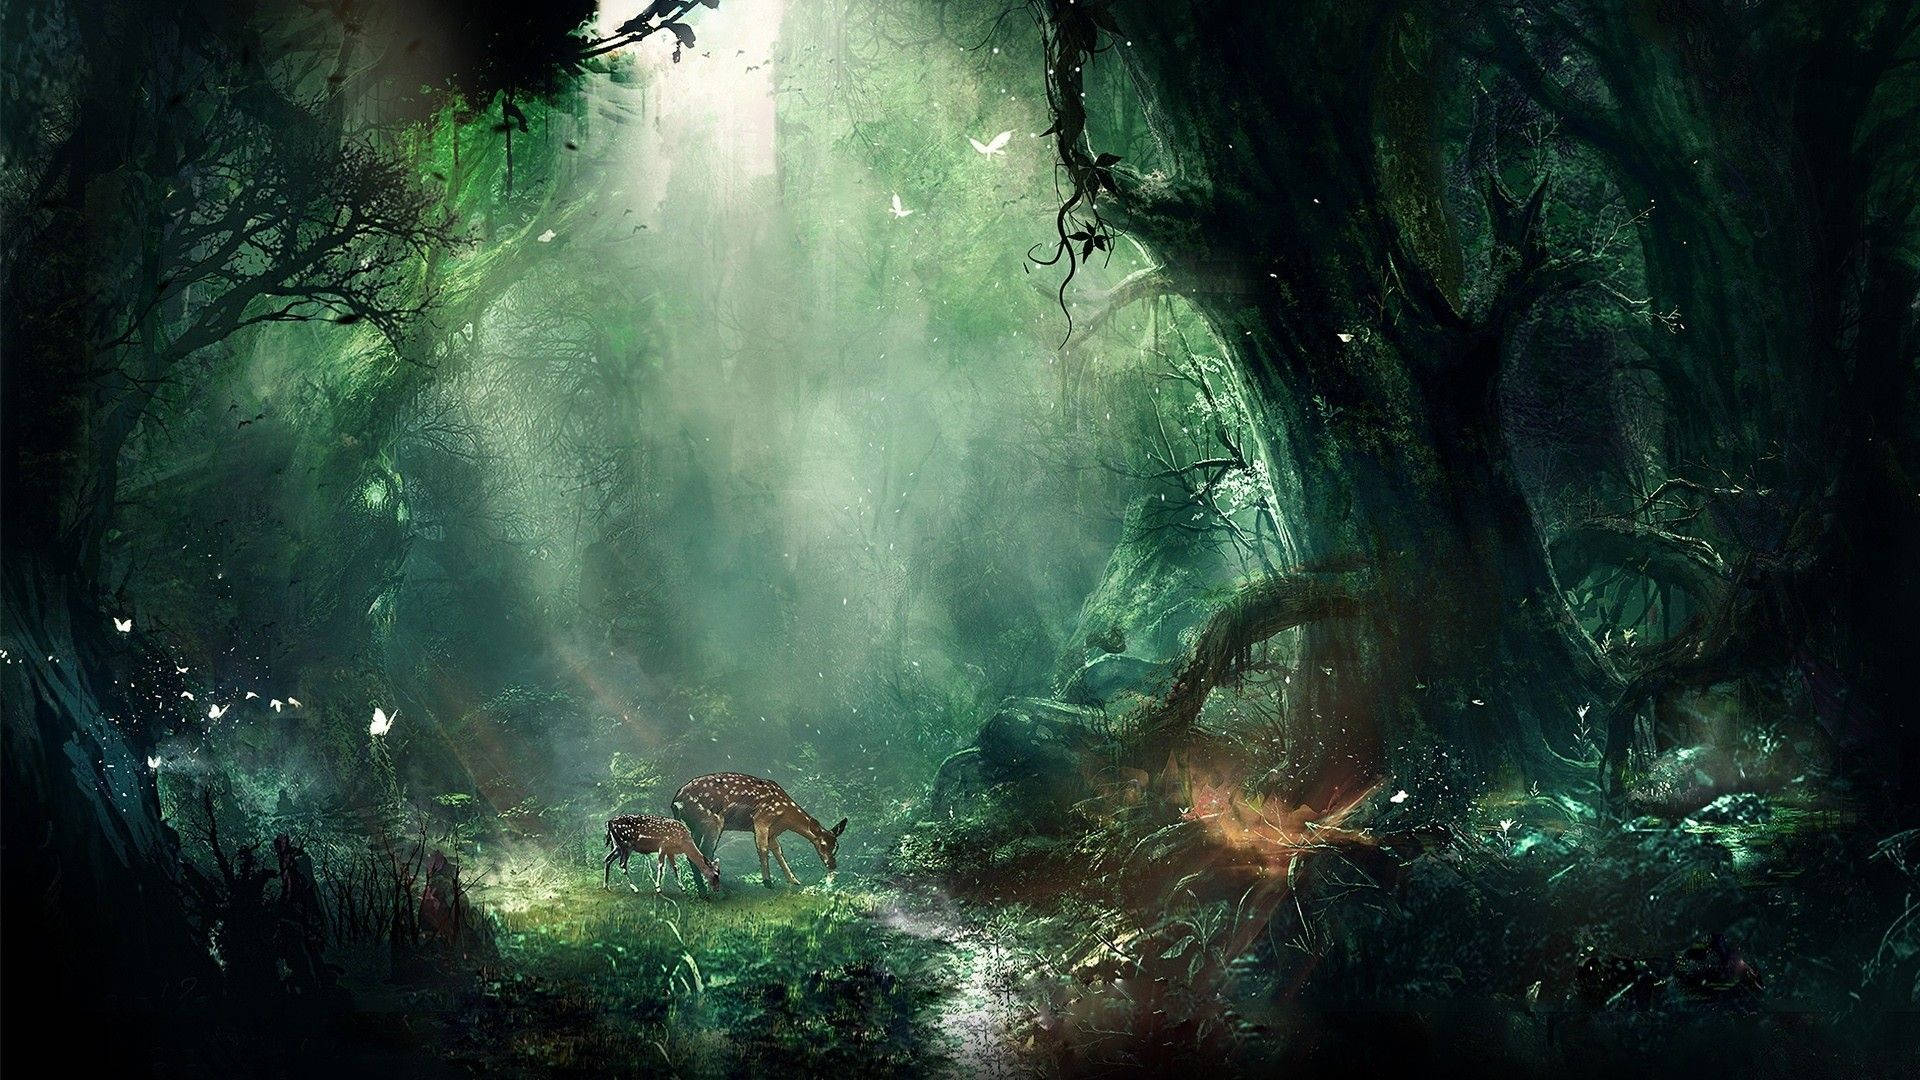 Take a journey through a Magical Fantasy Forest Wallpaper